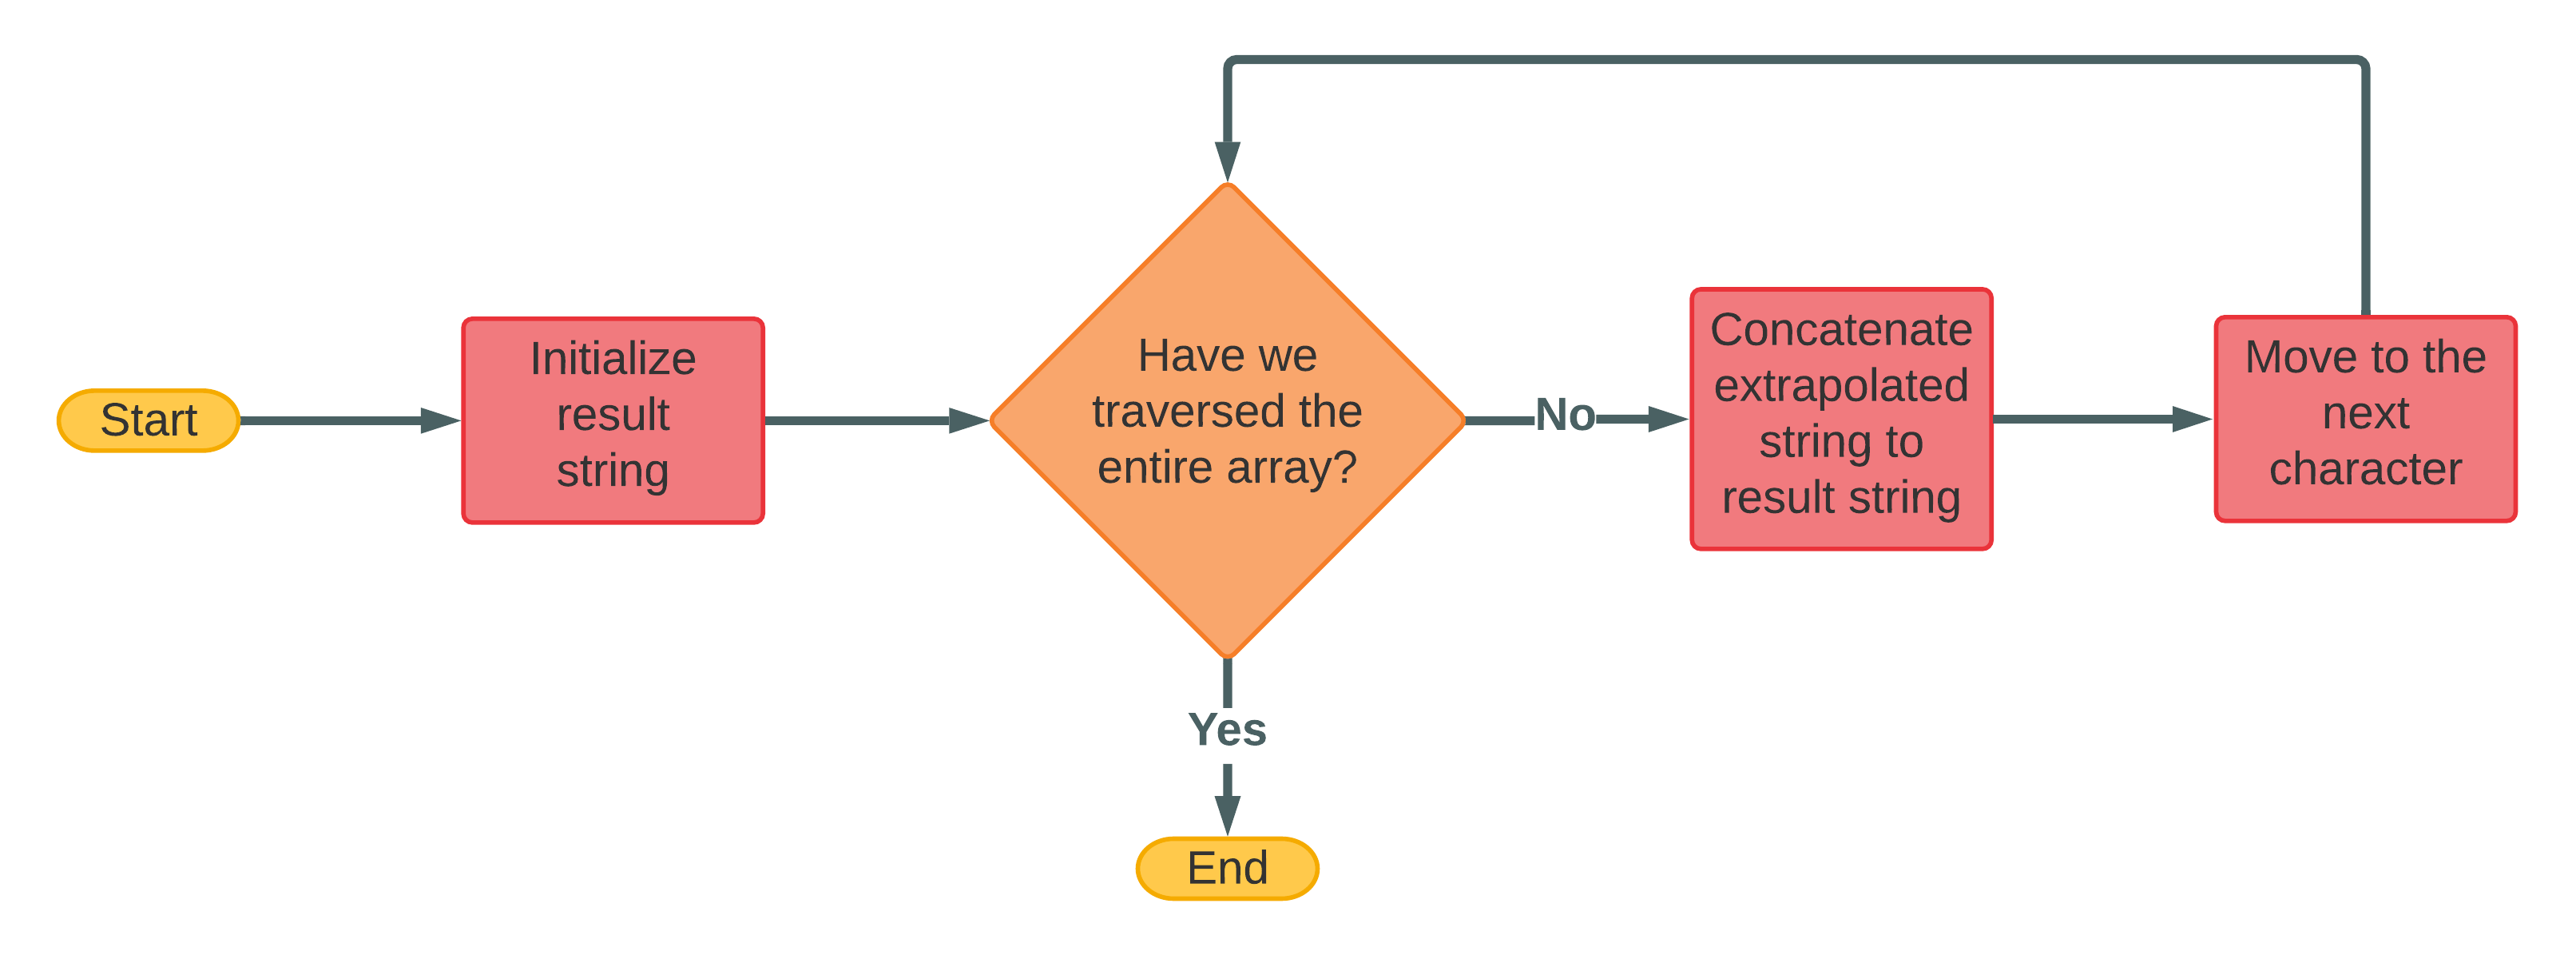 A flowchart illustrating the logic of joining extrapolated characters.